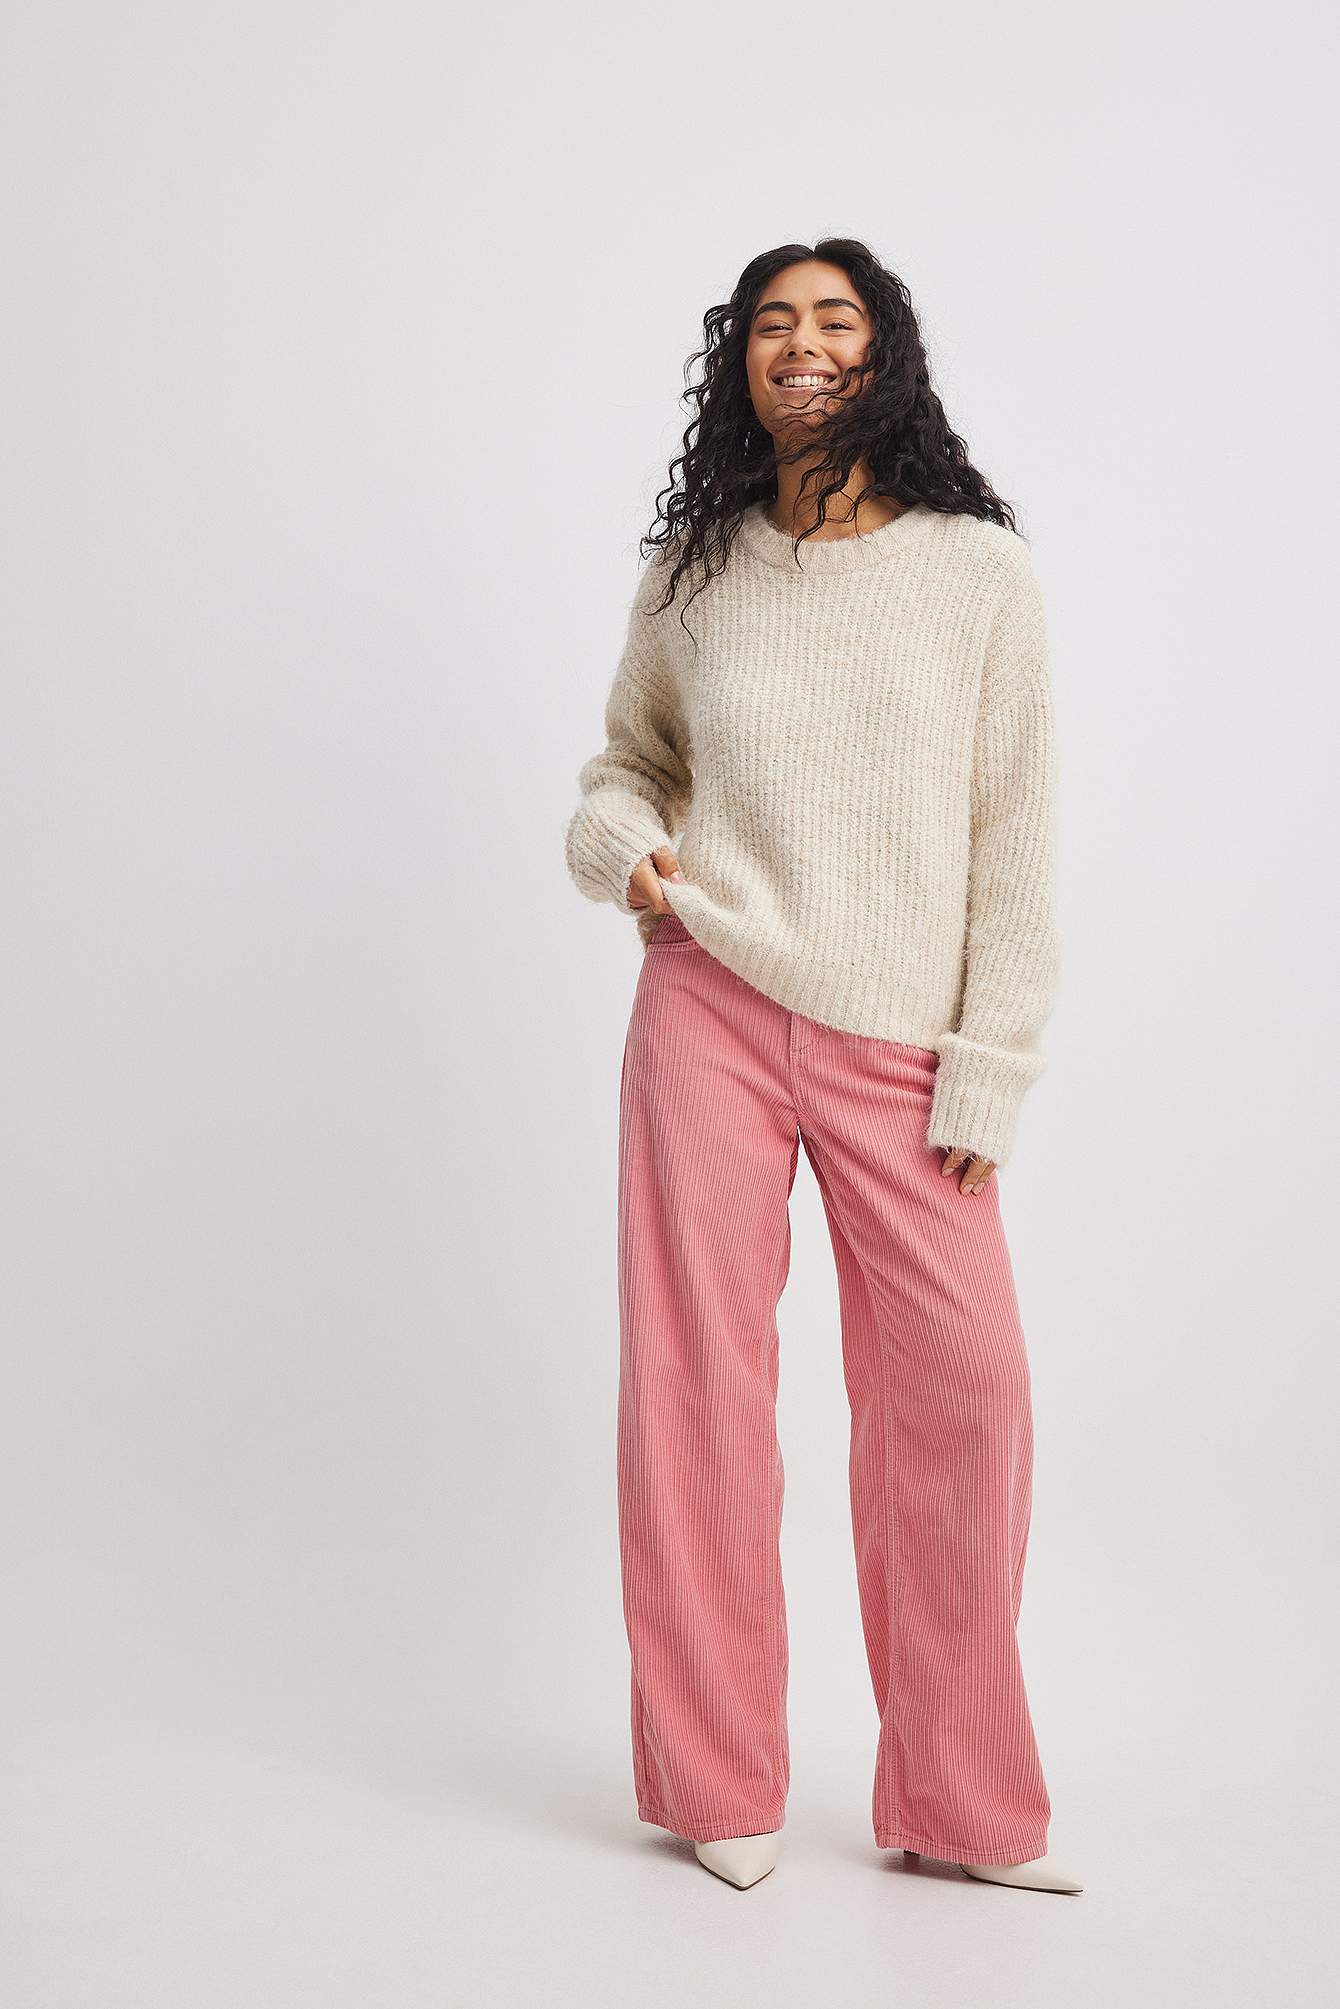 Rezek Studio Pink Trousers – greens are good for you